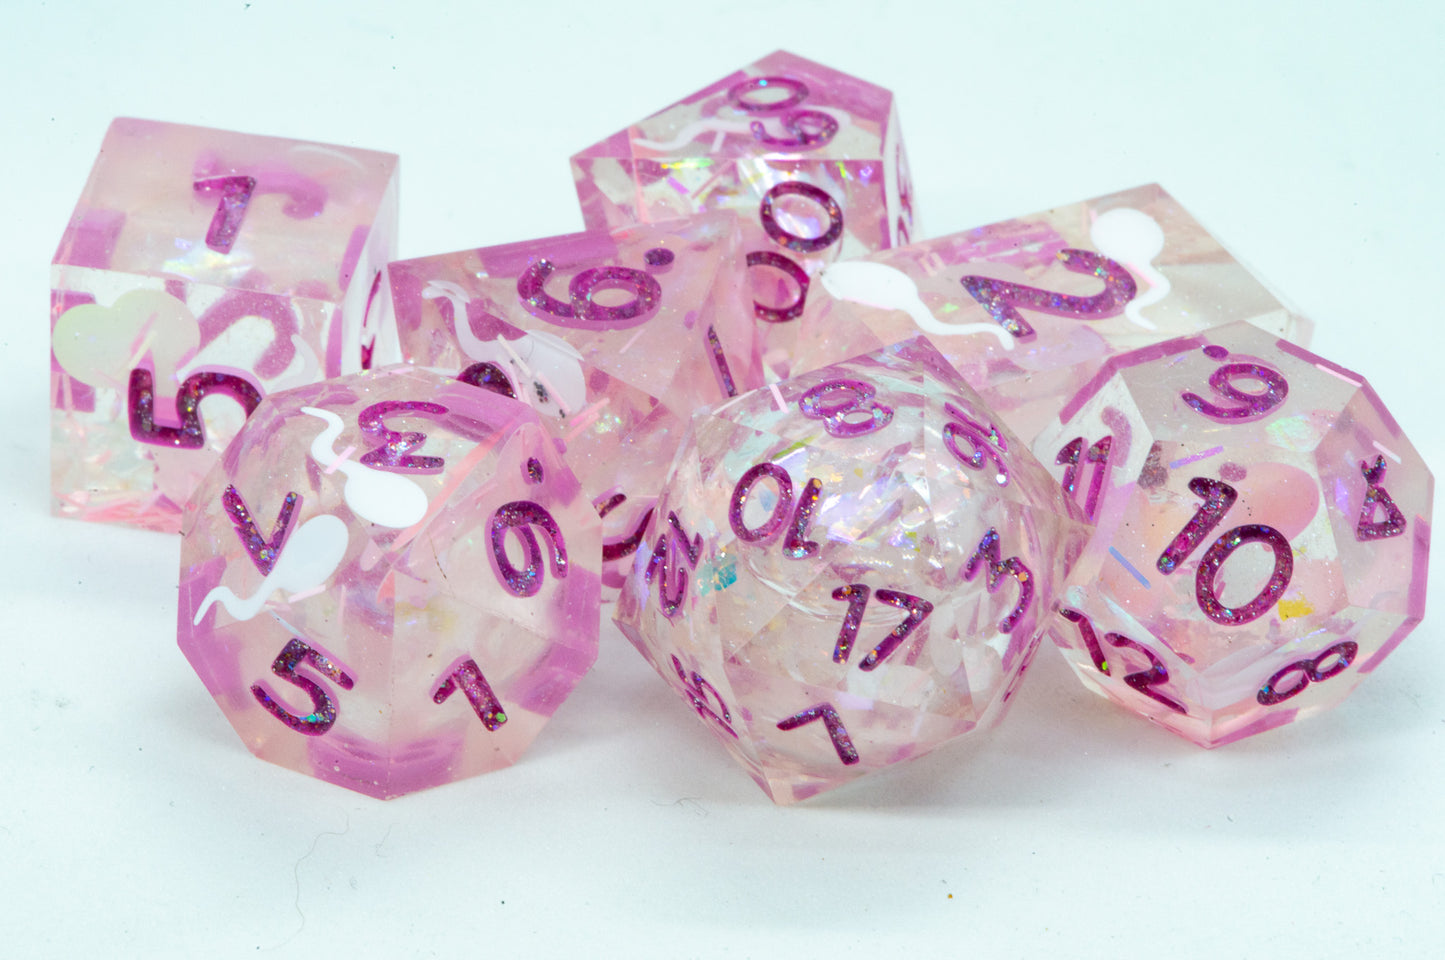 Swimmers 7 rpg dice set